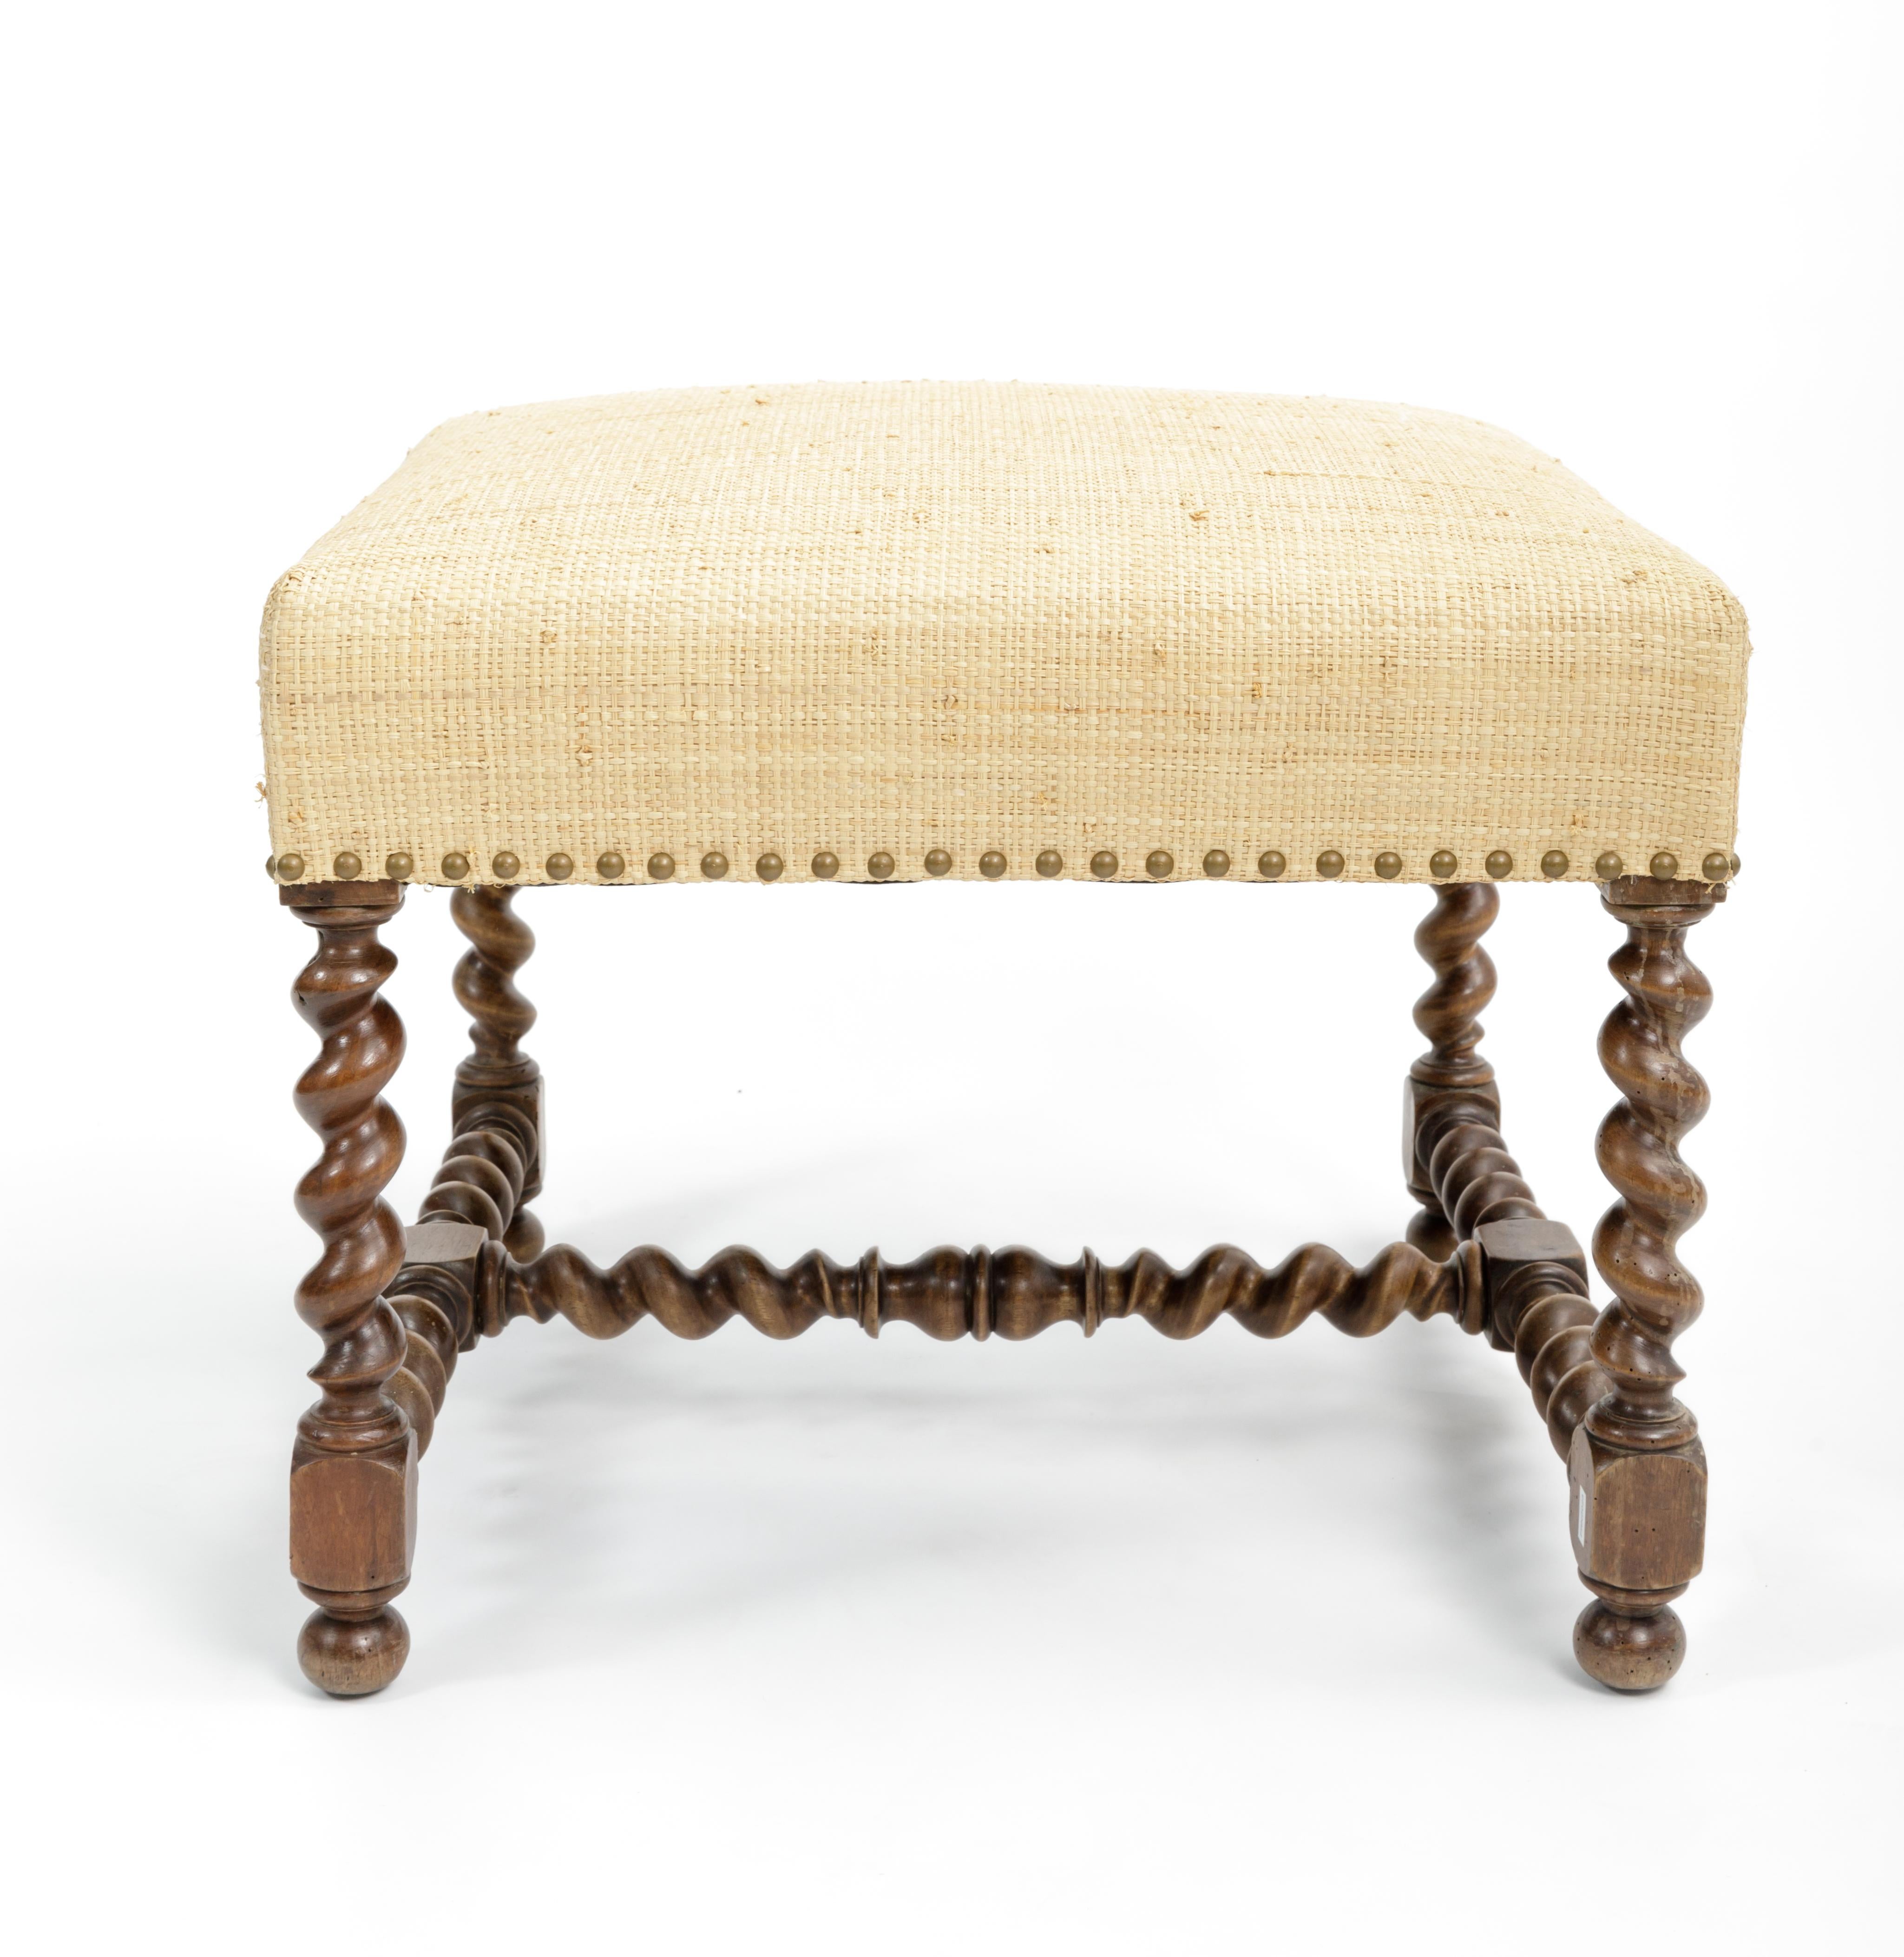 Antique Barley twist stool with cream linen upholstery, Europe, 19th Century

This traditional yet chic stool/ottoman consists of barley twist legs and stretchers, cream linen upholstery, and classic nail head trim details. 


 